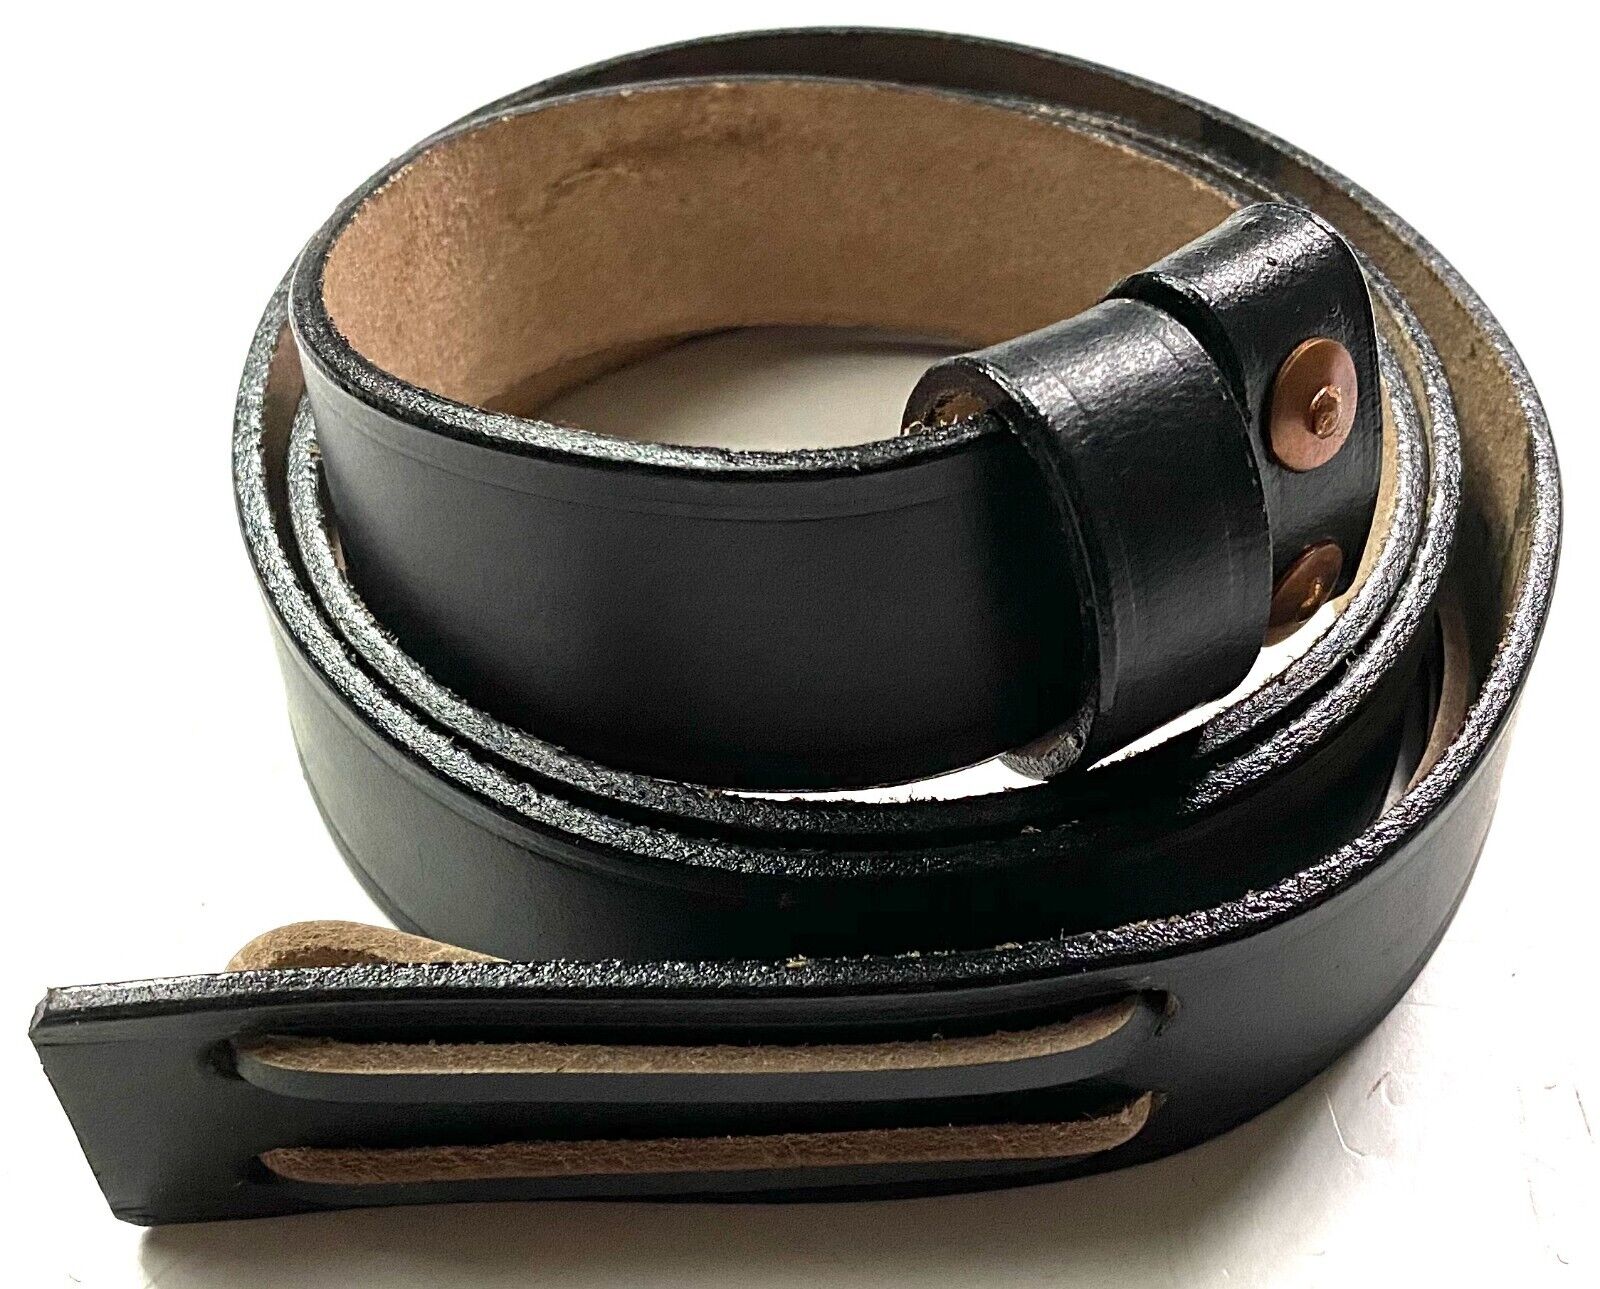 Enfield 1907 Black Leather Rifle Sling - Reproduction